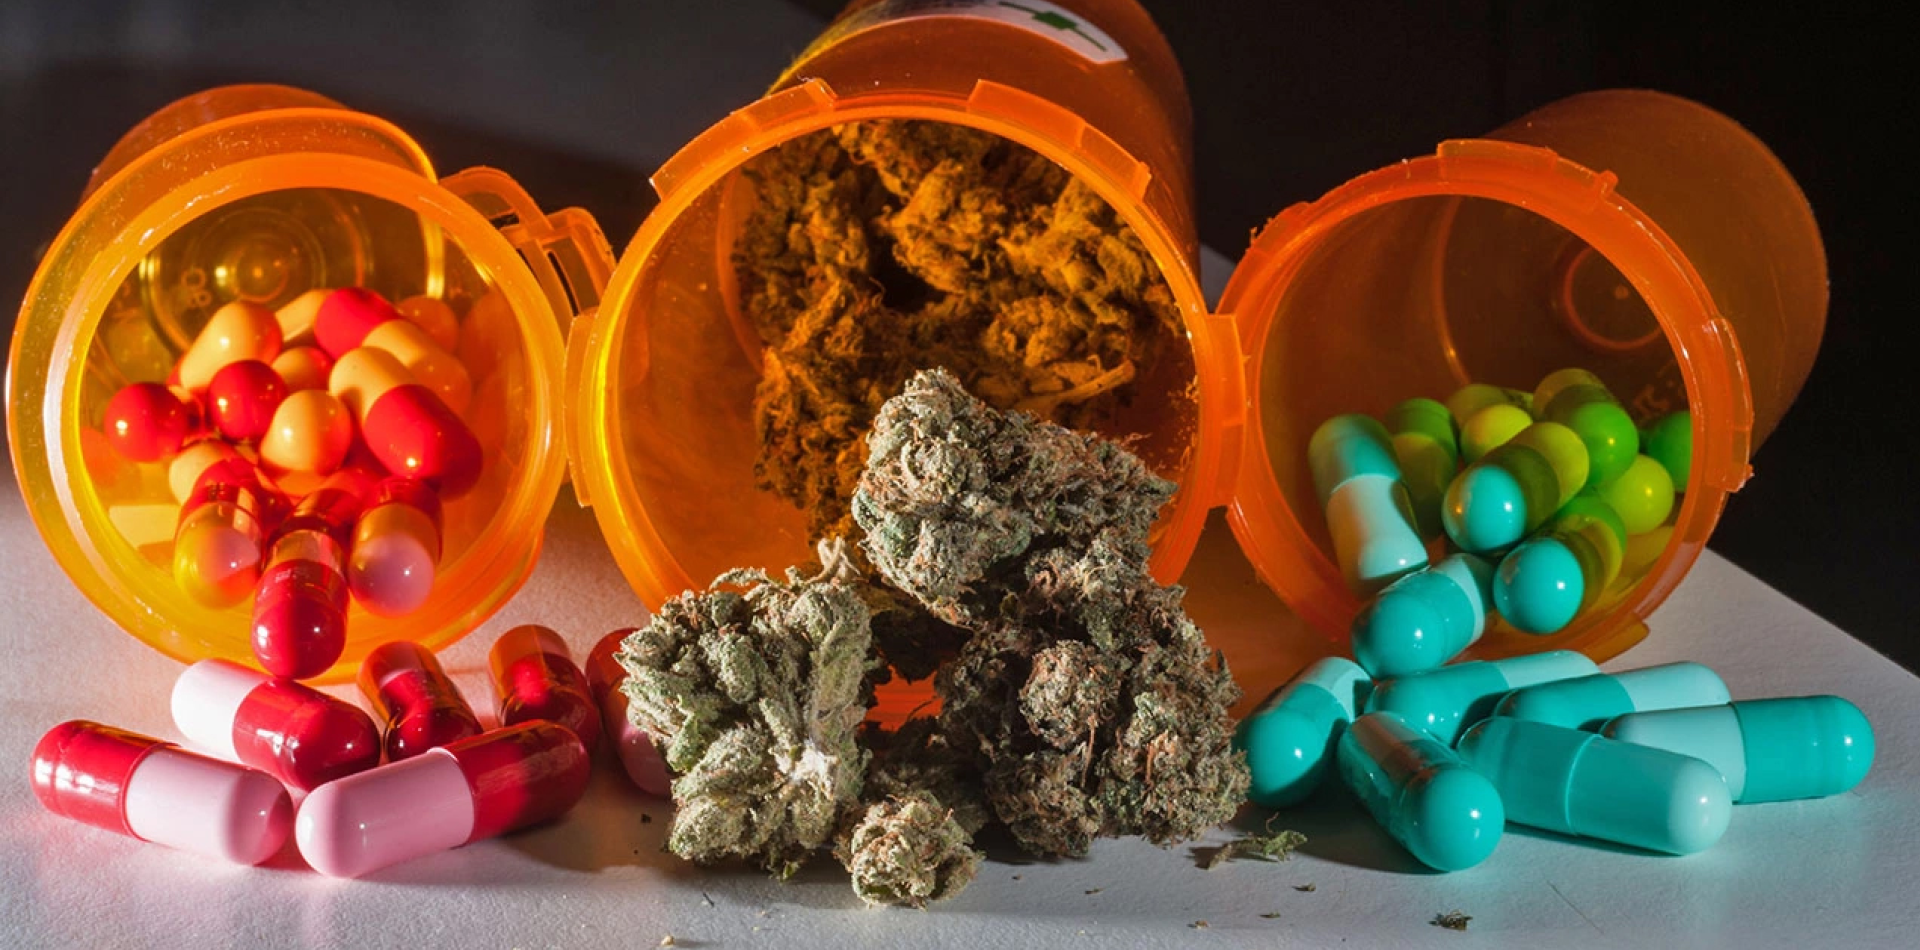 Opinion: 2022 could be the year for pharmaceutical marijuana